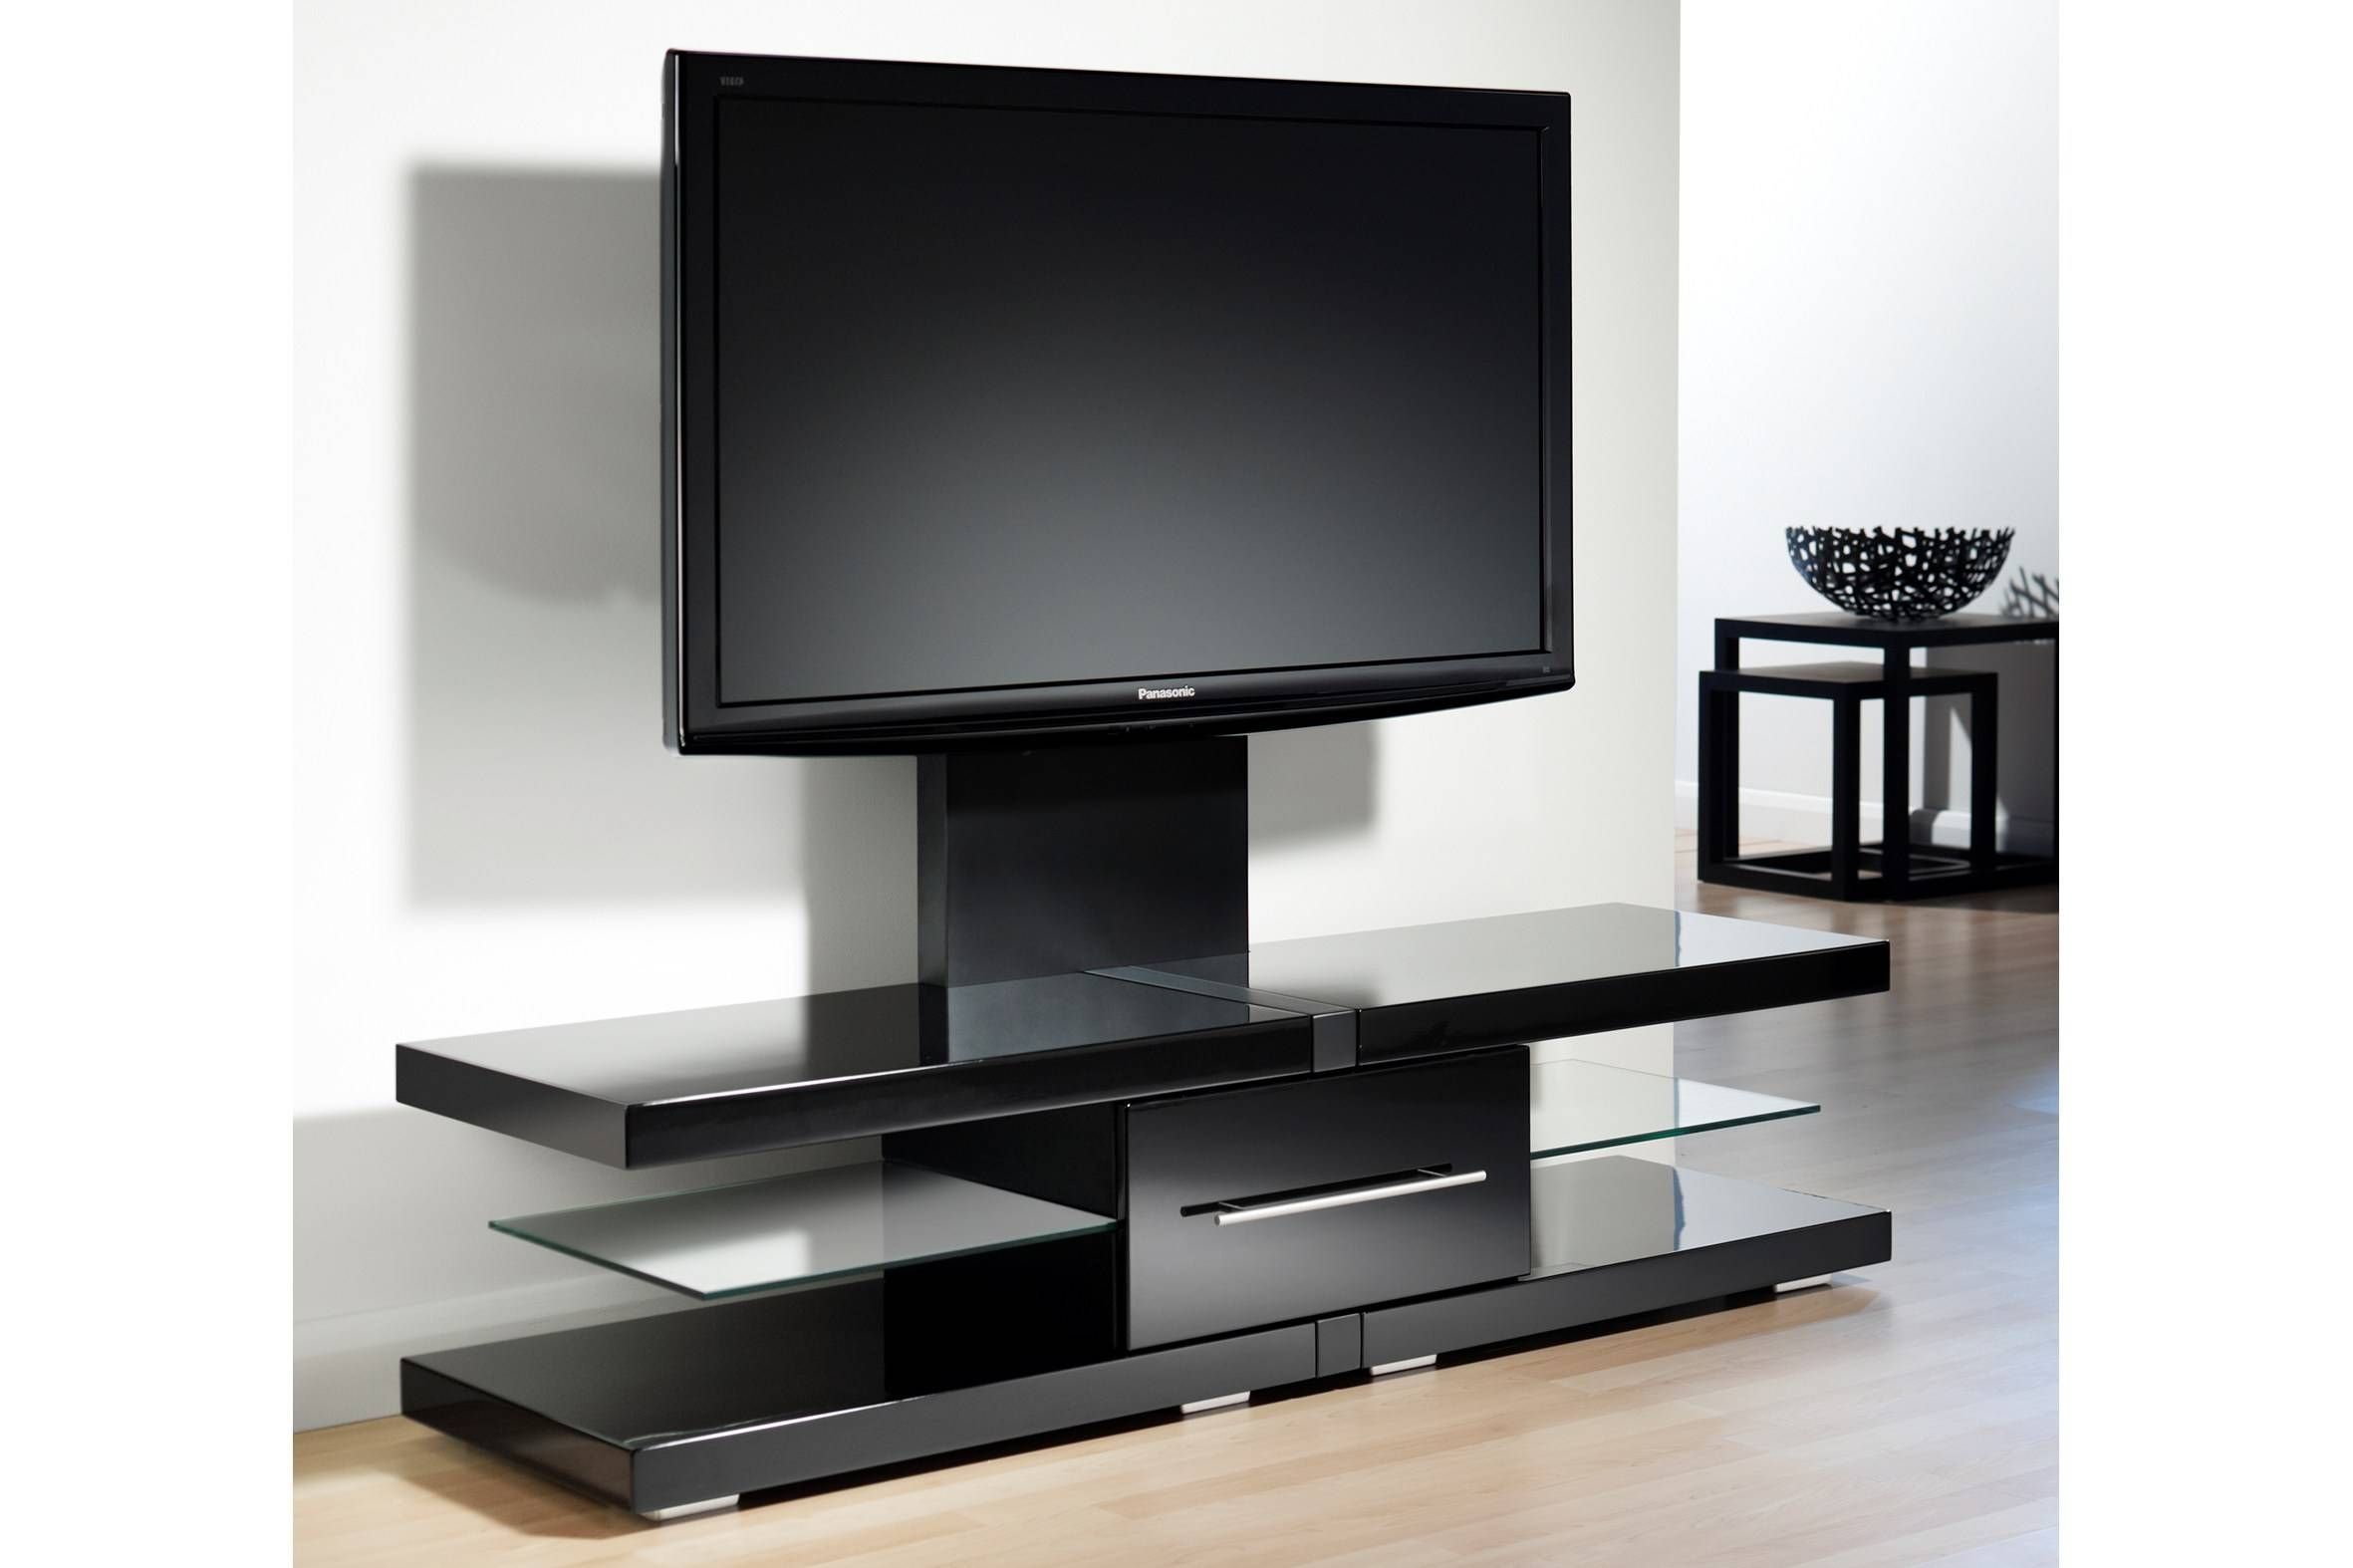 Fancy Tv Stand Cabinet Design 85 With Tv Stand Cabinet Design – Home For Fancy Tv Stands (View 4 of 15)